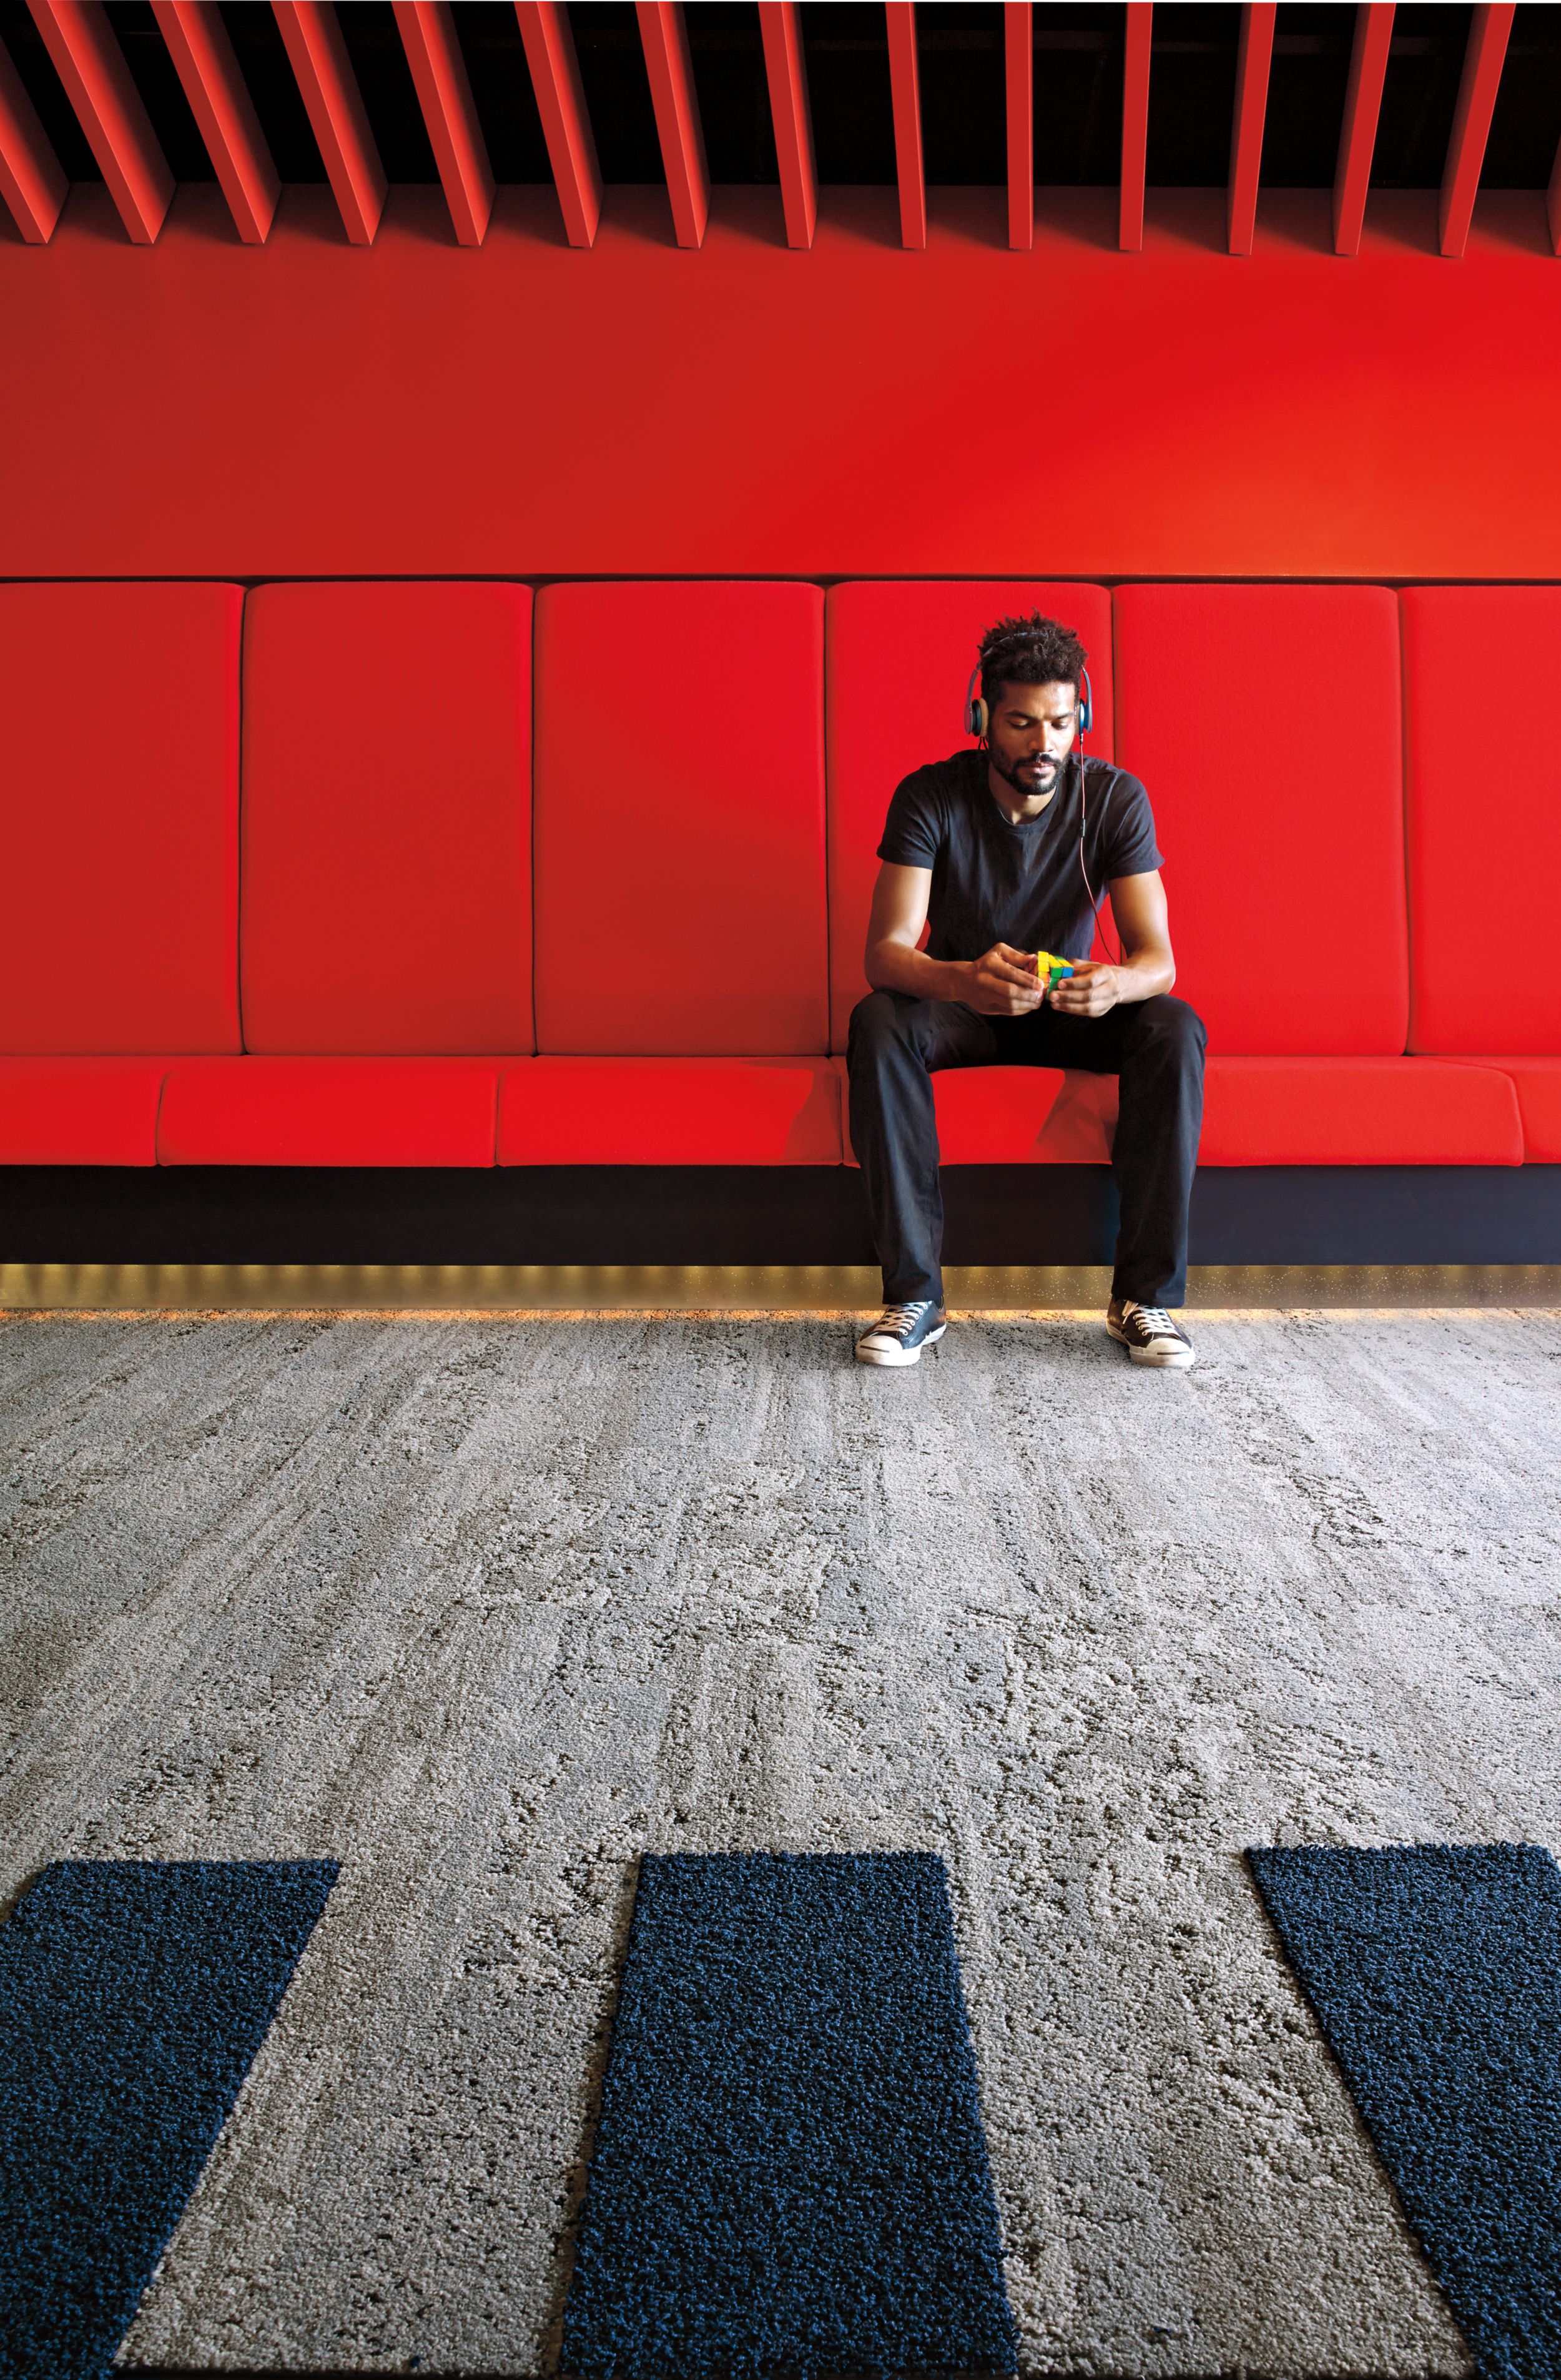 Interface HN810 plank carpet tile in waiting area with red bench and wall and man listening to music image number 7